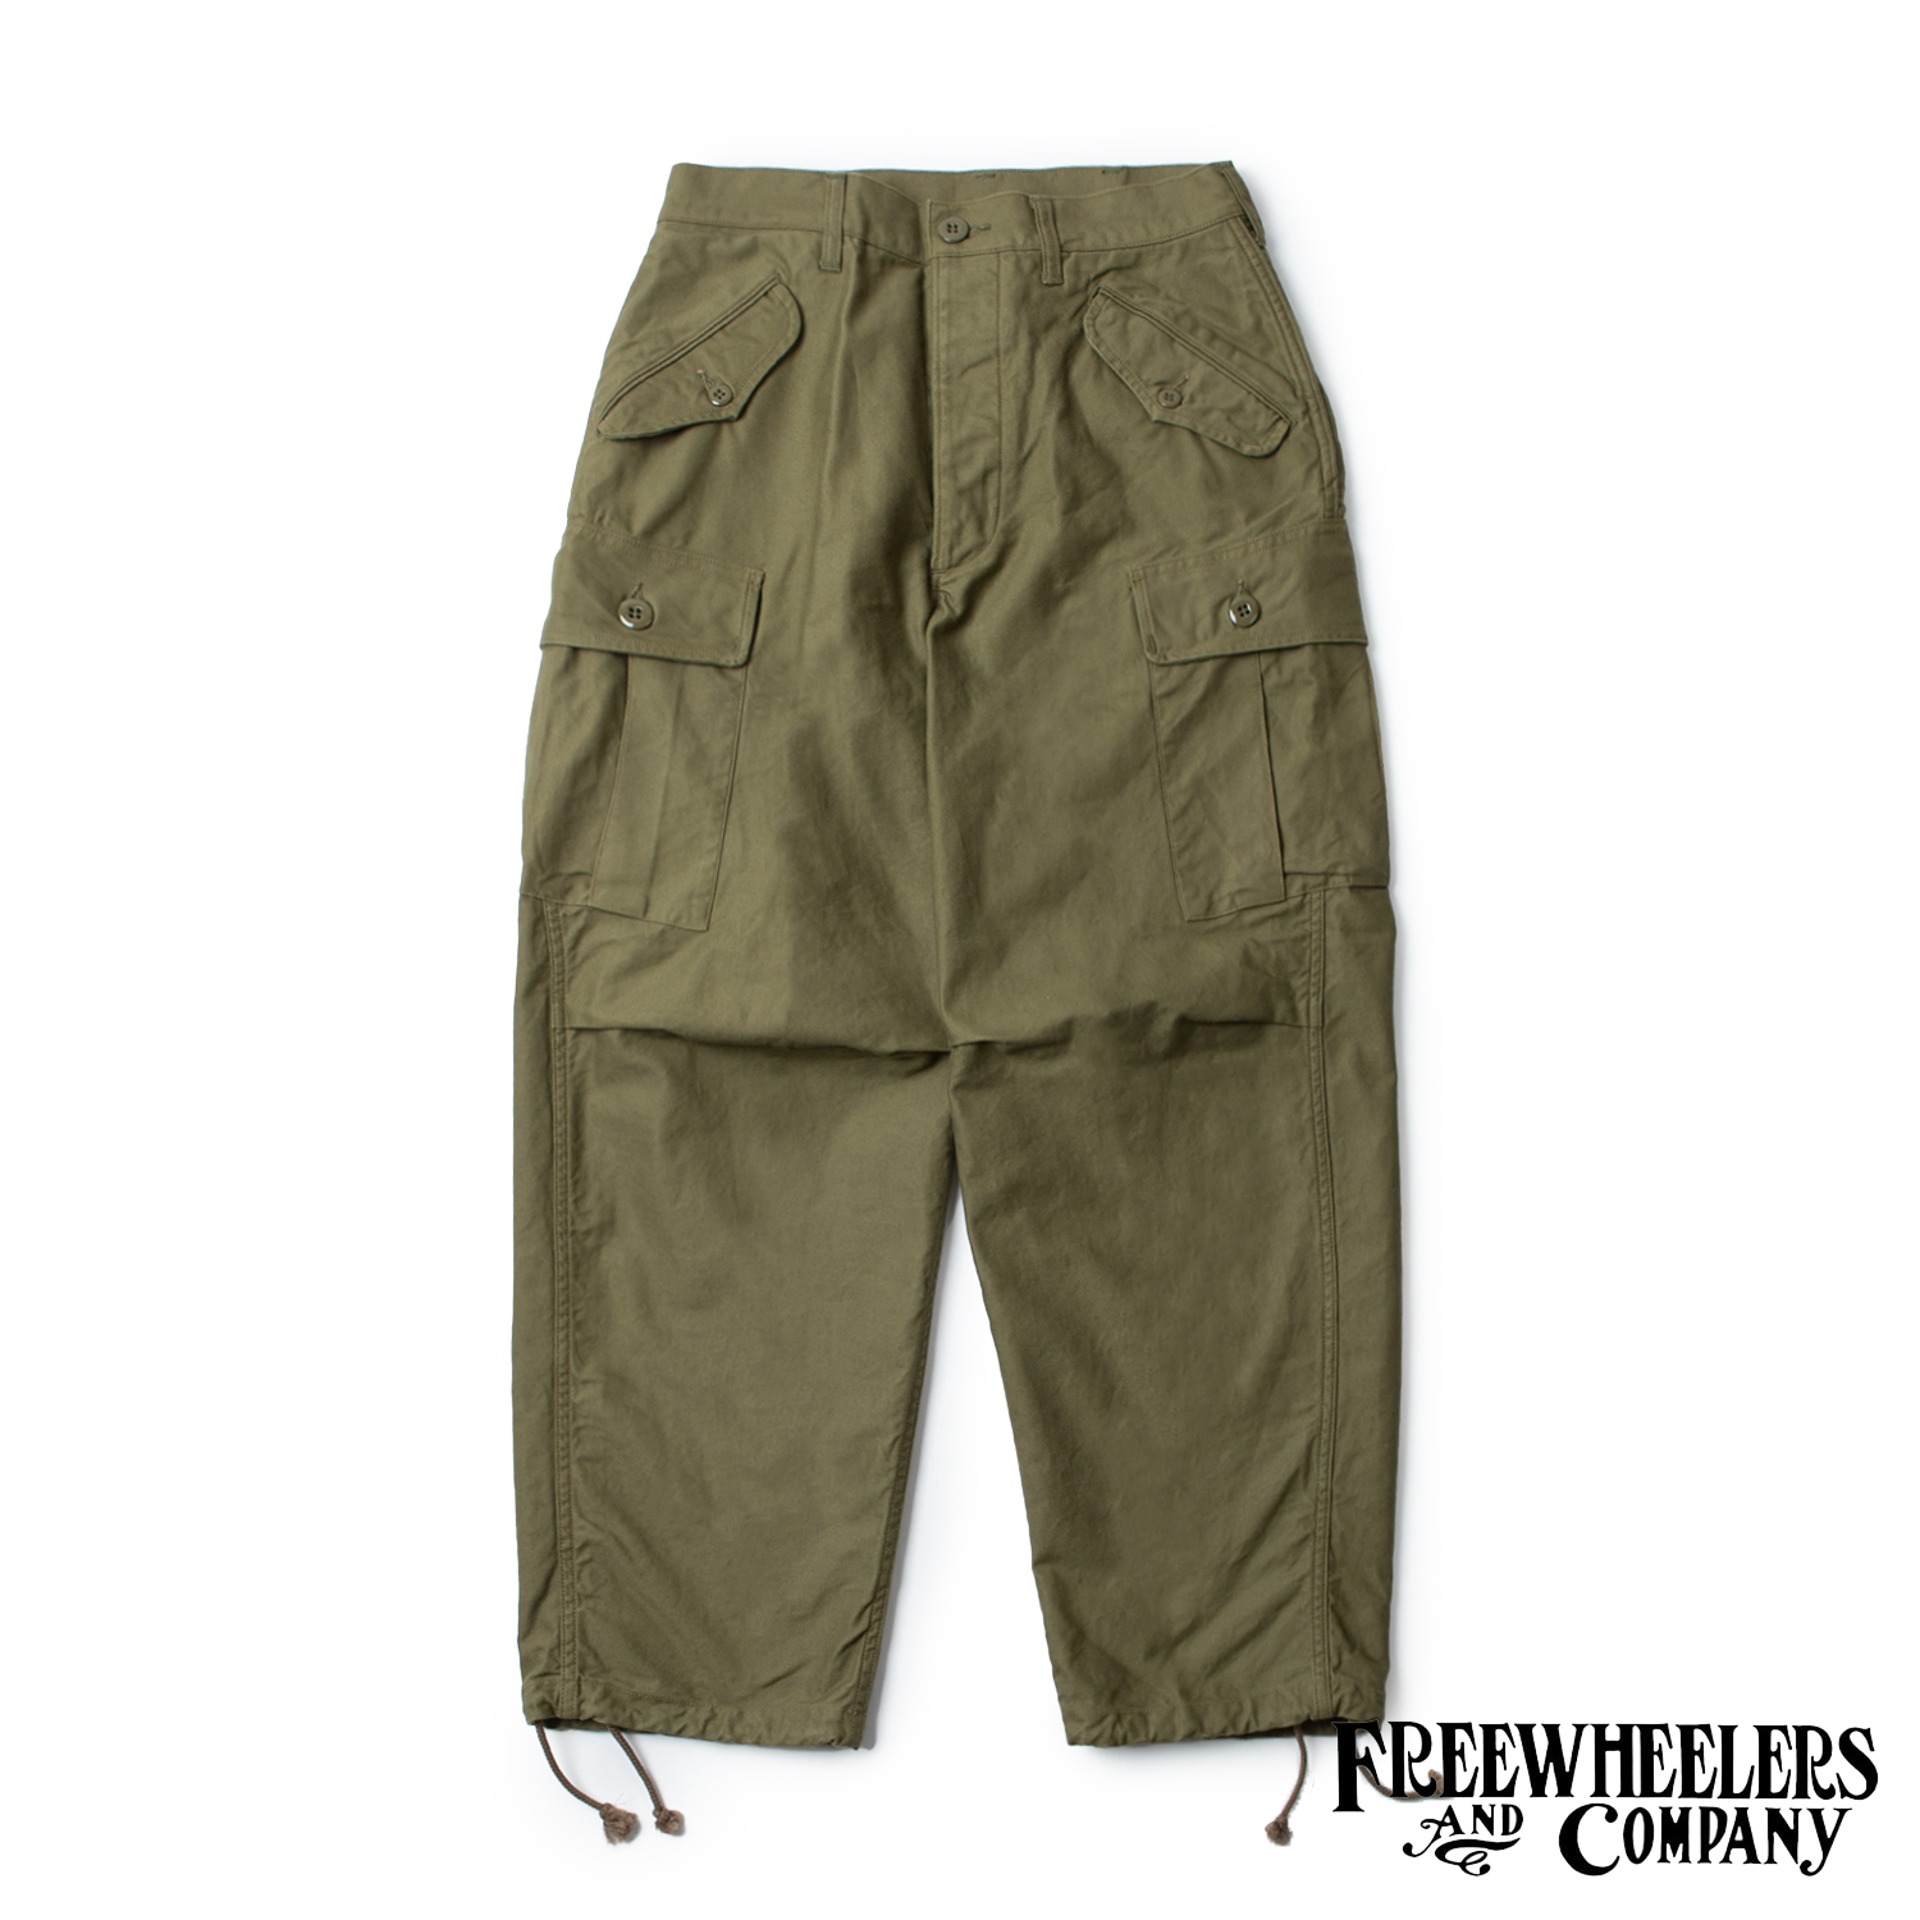  [UNION SPECIAL OVERALLS]   Military Tropical Trousers  “JUNGLE FATIGUES”  (Olive)